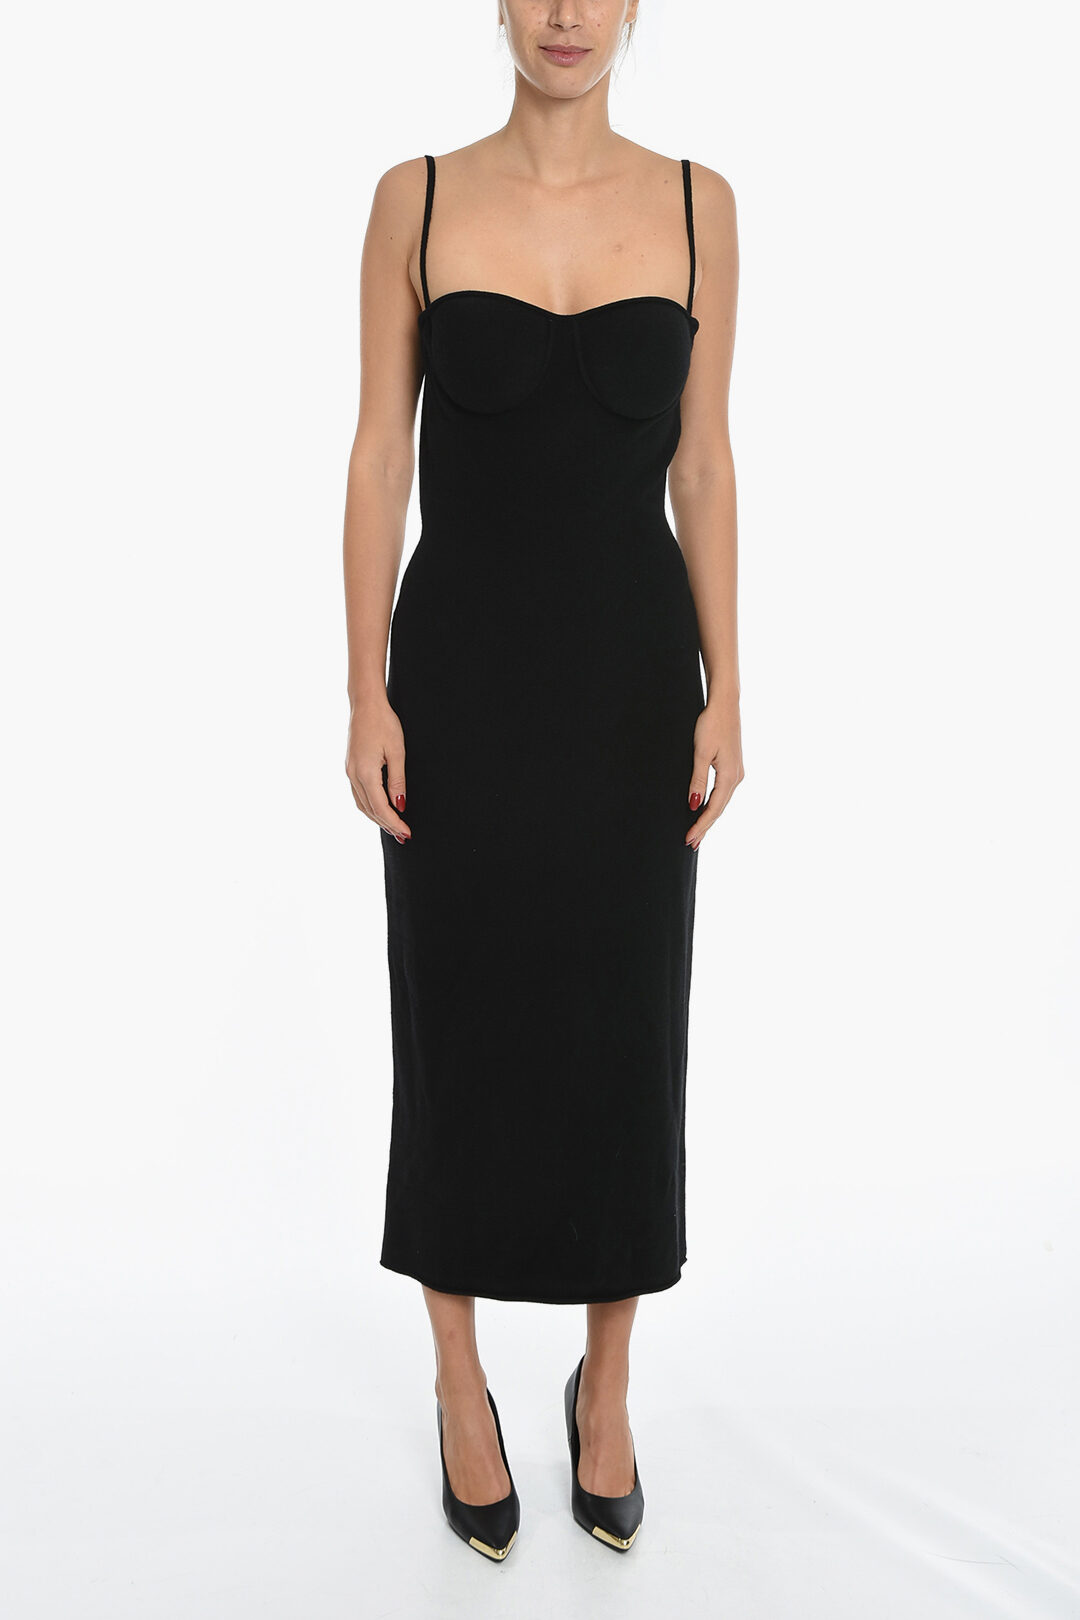 Cashmere Blend Midi Dress With Built-In Bra